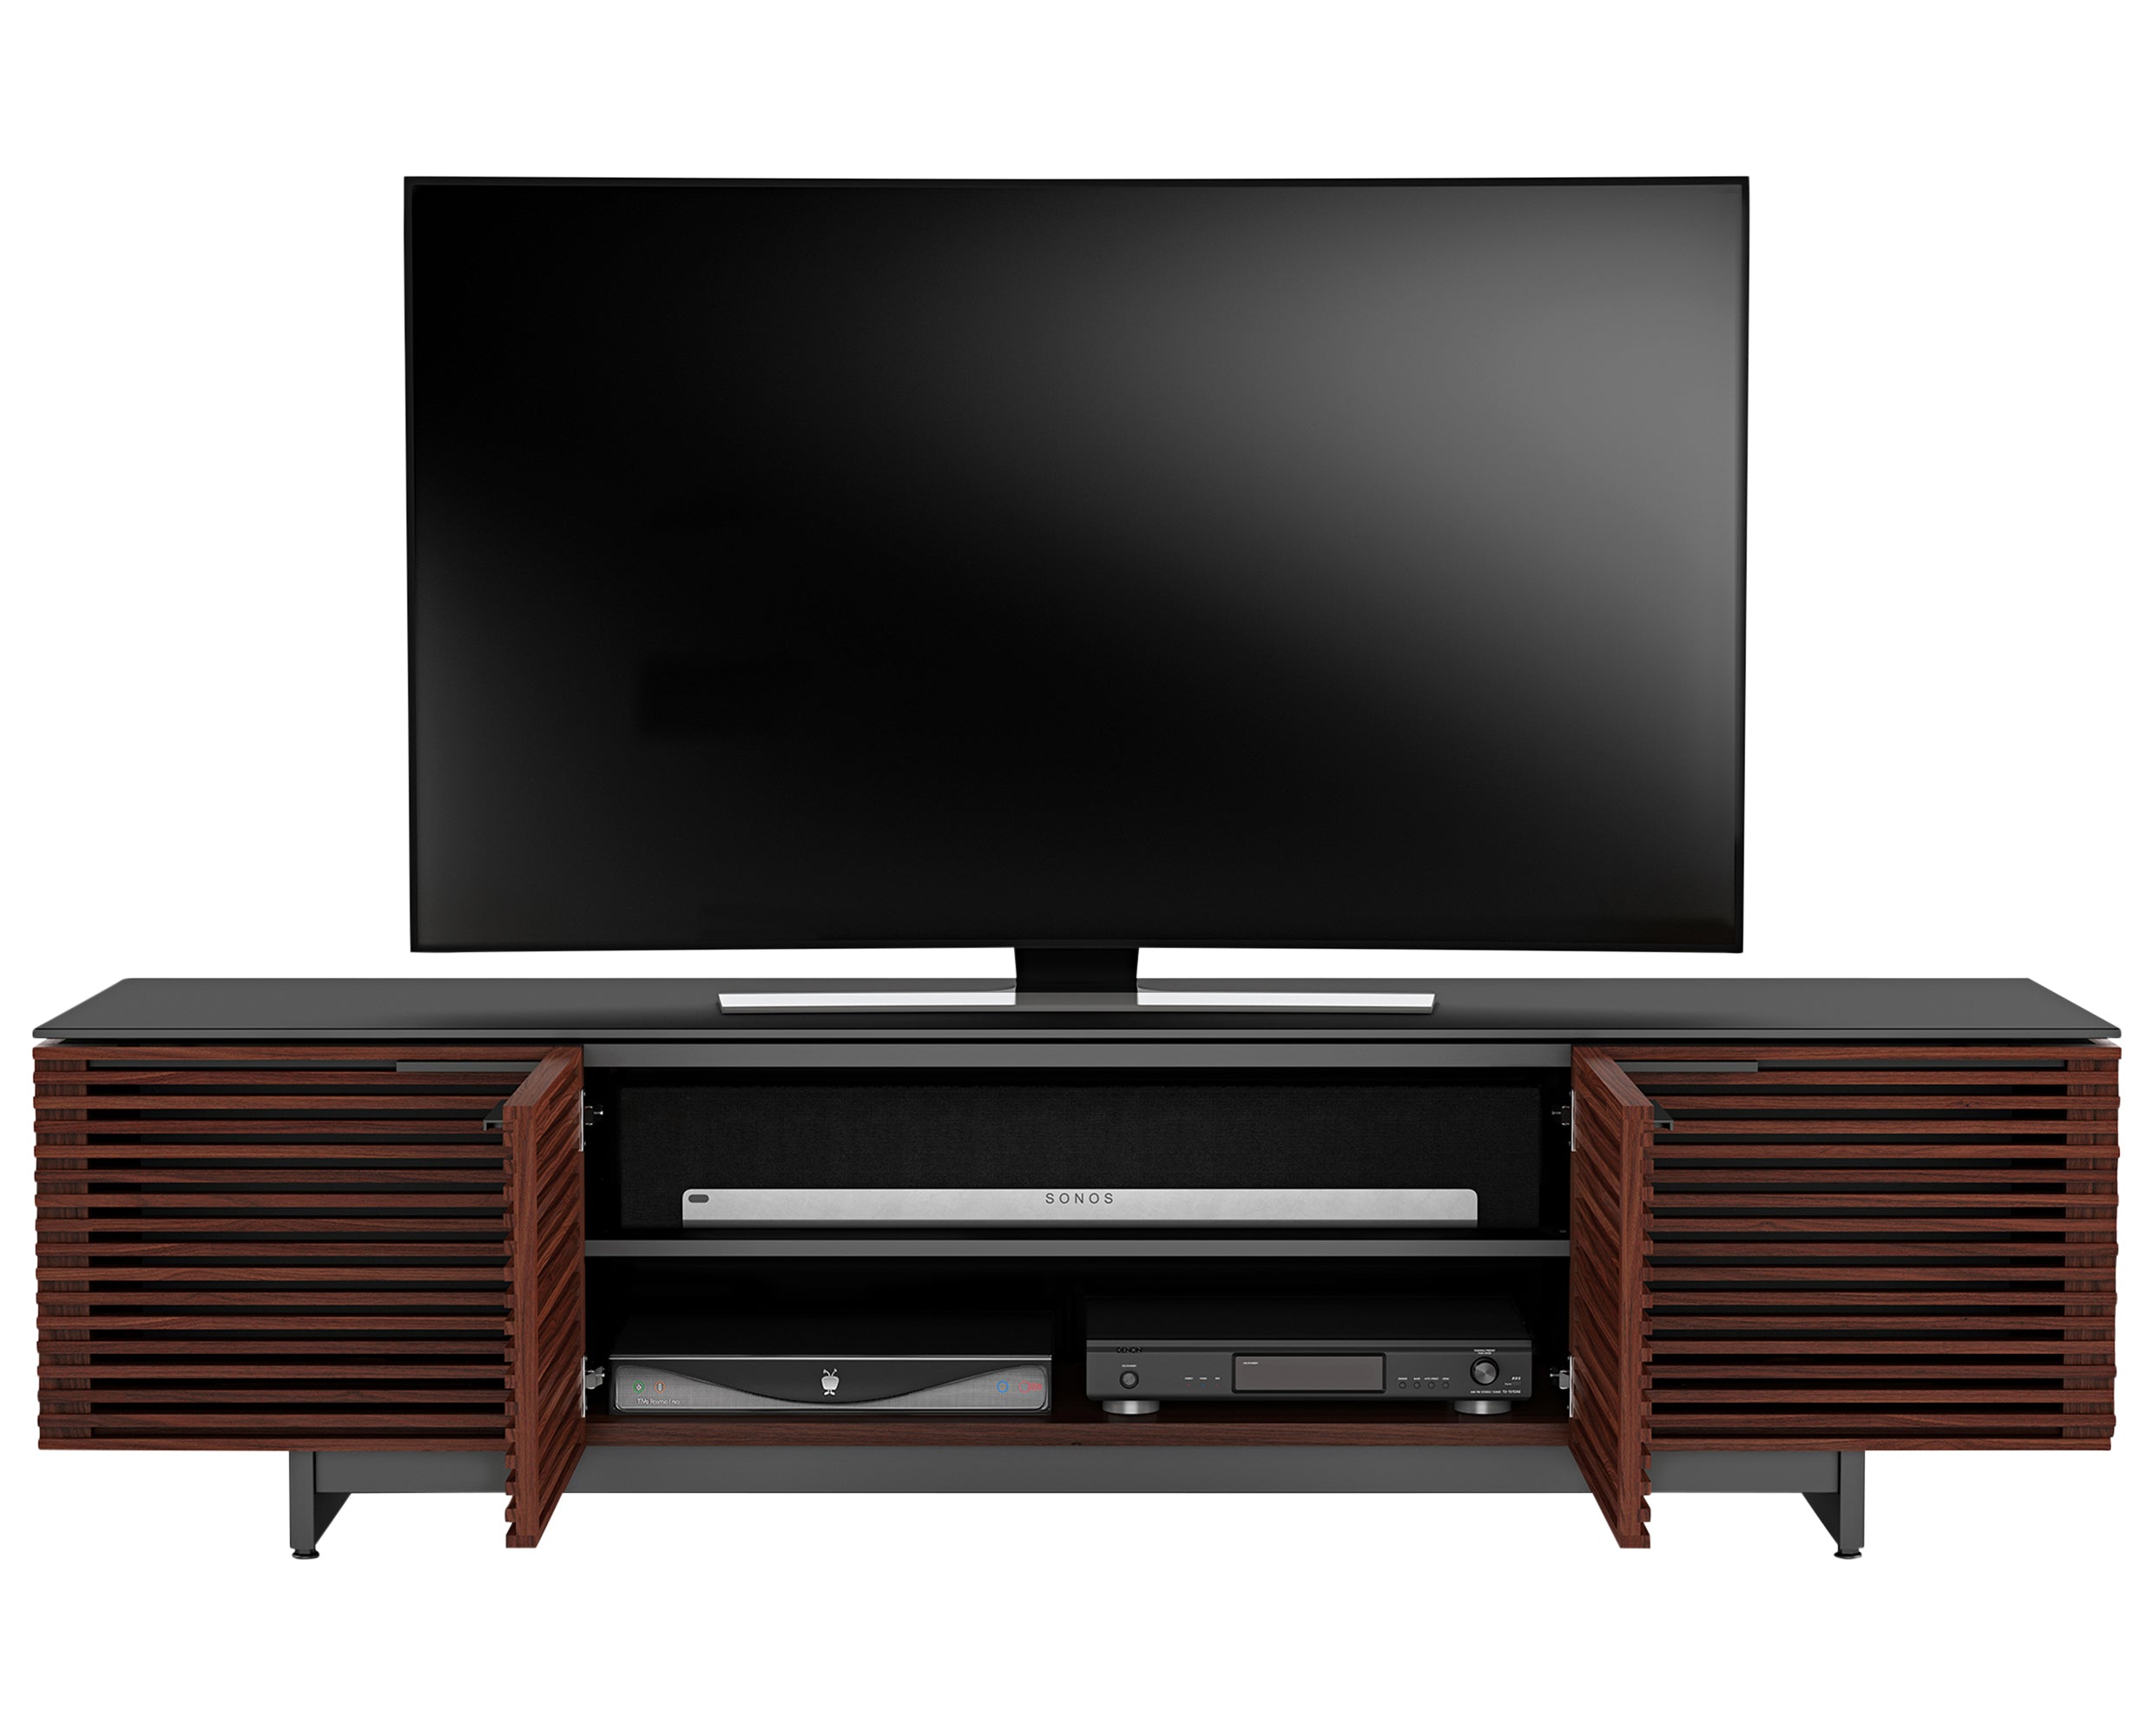 Chocolate Stained Walnut & Chocolate Walnut Veneer with Black Satin-Etched Glass & Black Steel | BDI Corridor Low Profile TV Stand | Valley Ridge Furniture